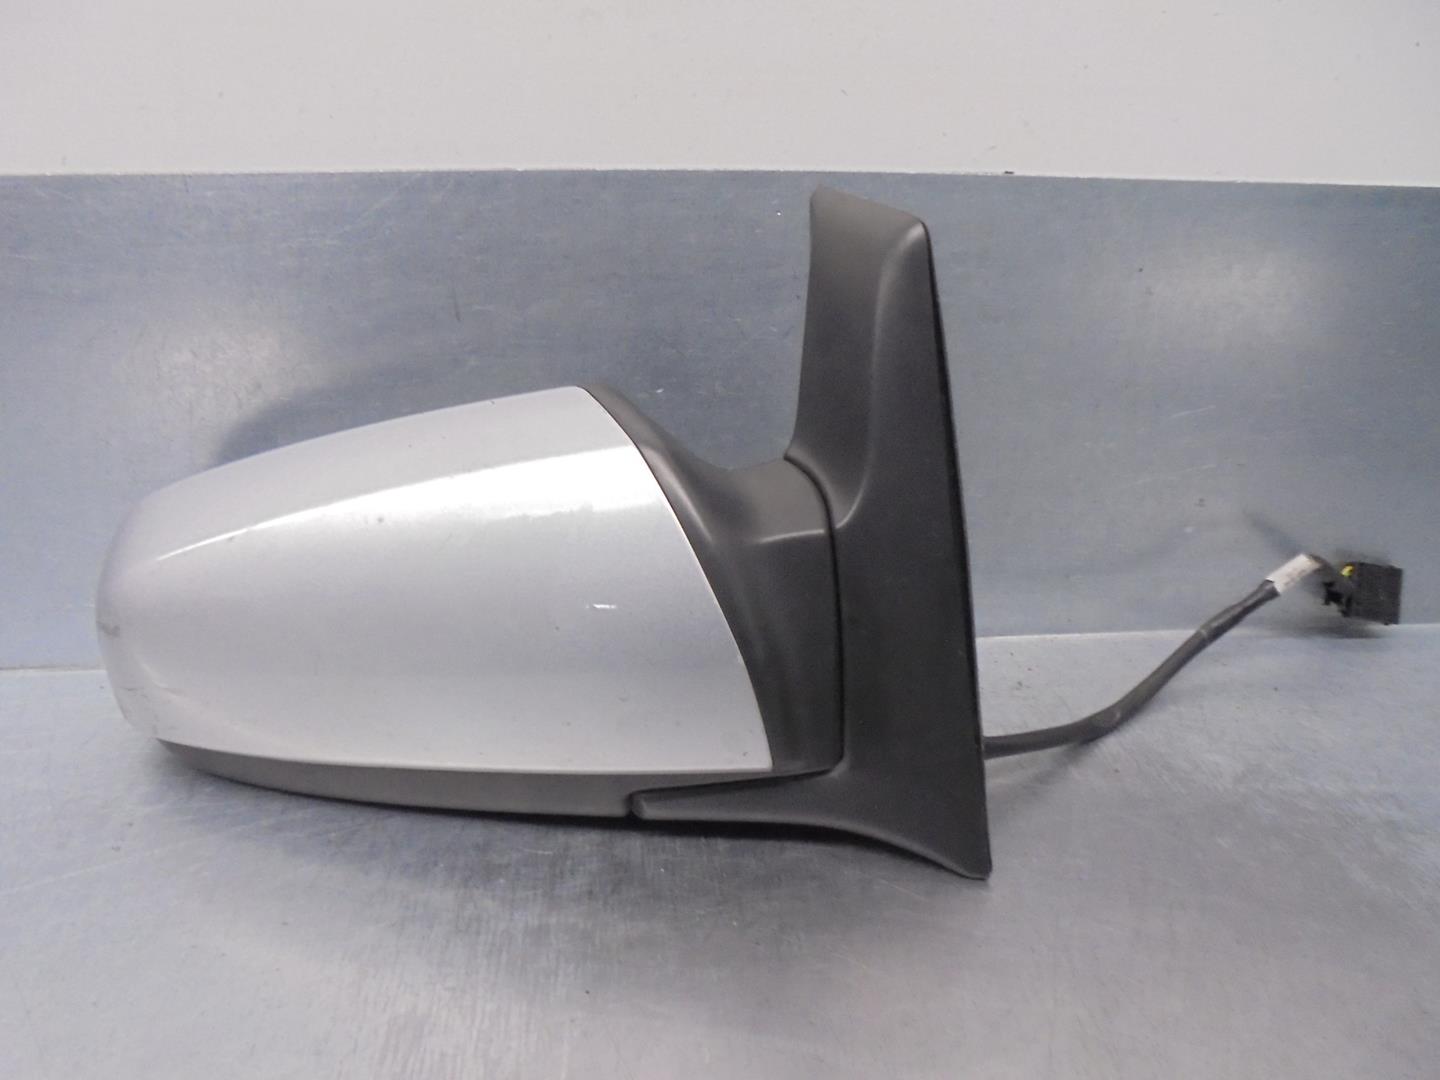 OPEL Zafira B (2005-2010) Right Side Wing Mirror 13131970, 5PINES, GRIS5PUERTAS 24177696